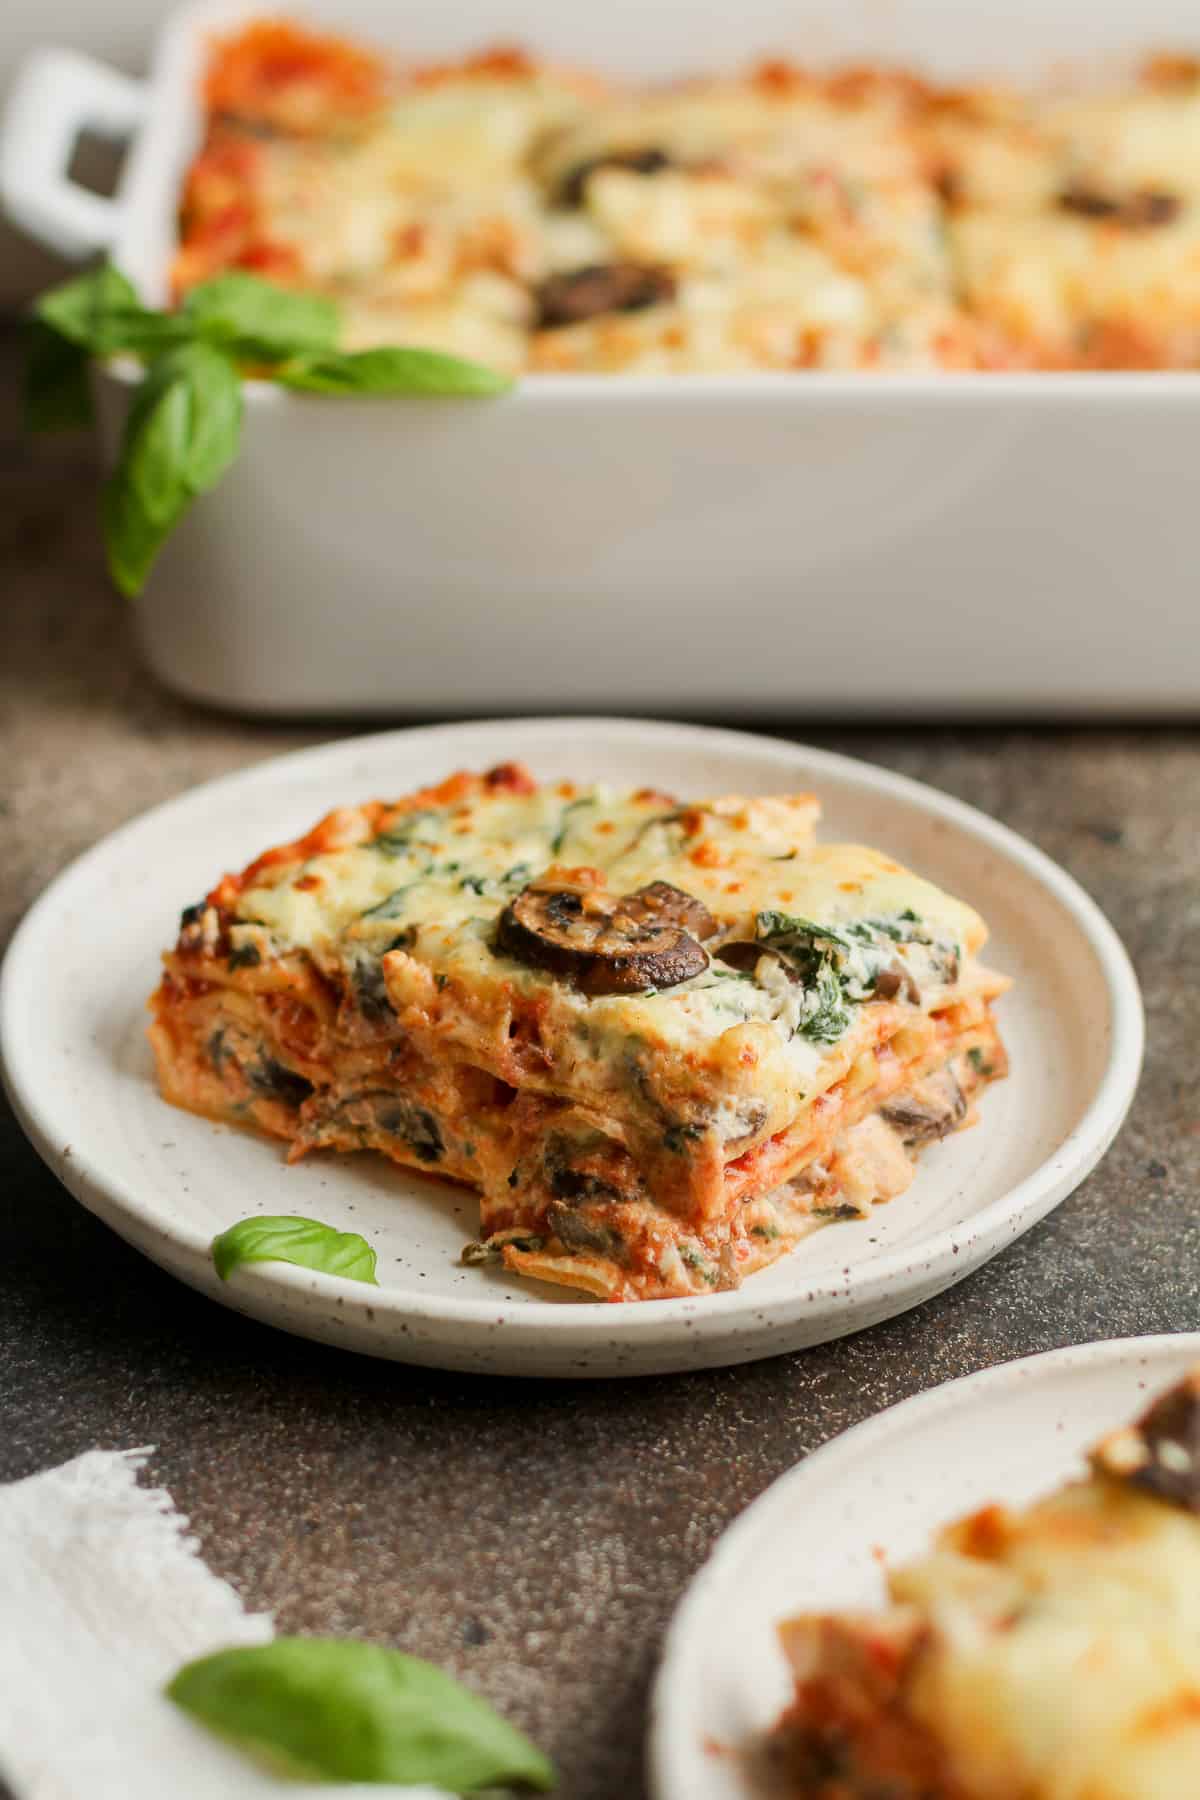 A plate of spinach ricotta lasagna with mushrooms.